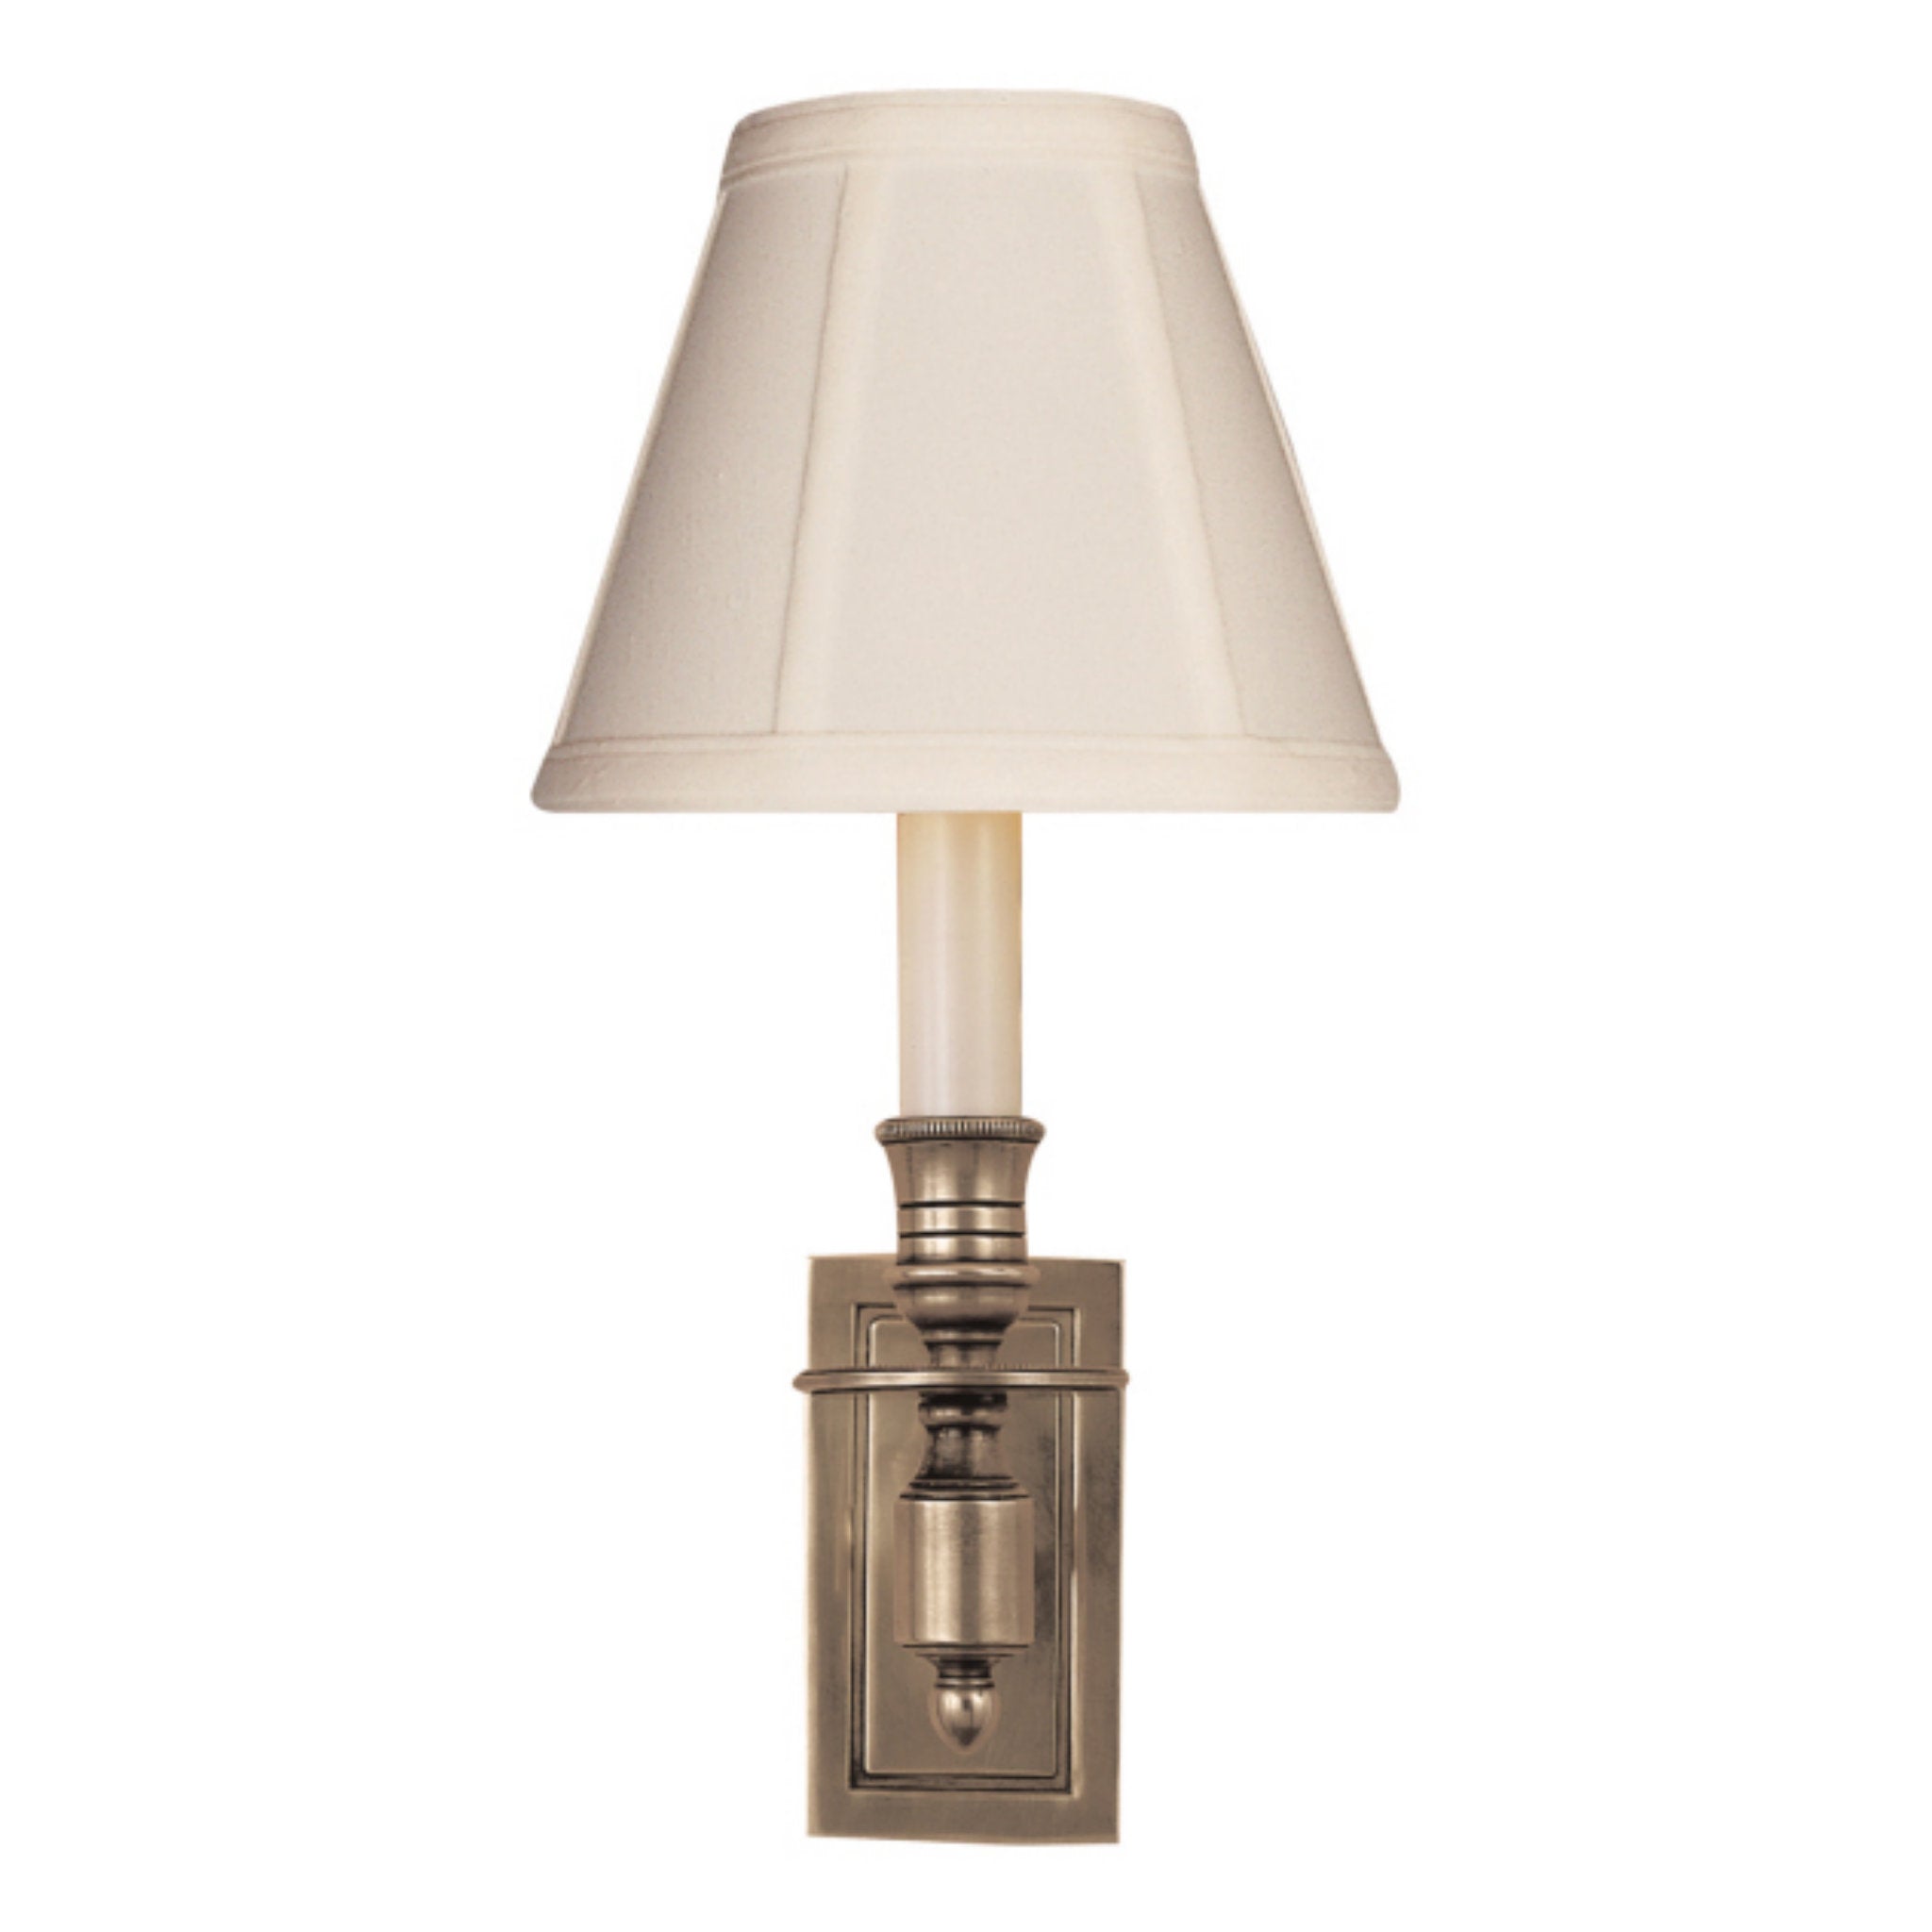 Visual Comfort French Single Library Sconce in Antique Nickel with Tissue Shade